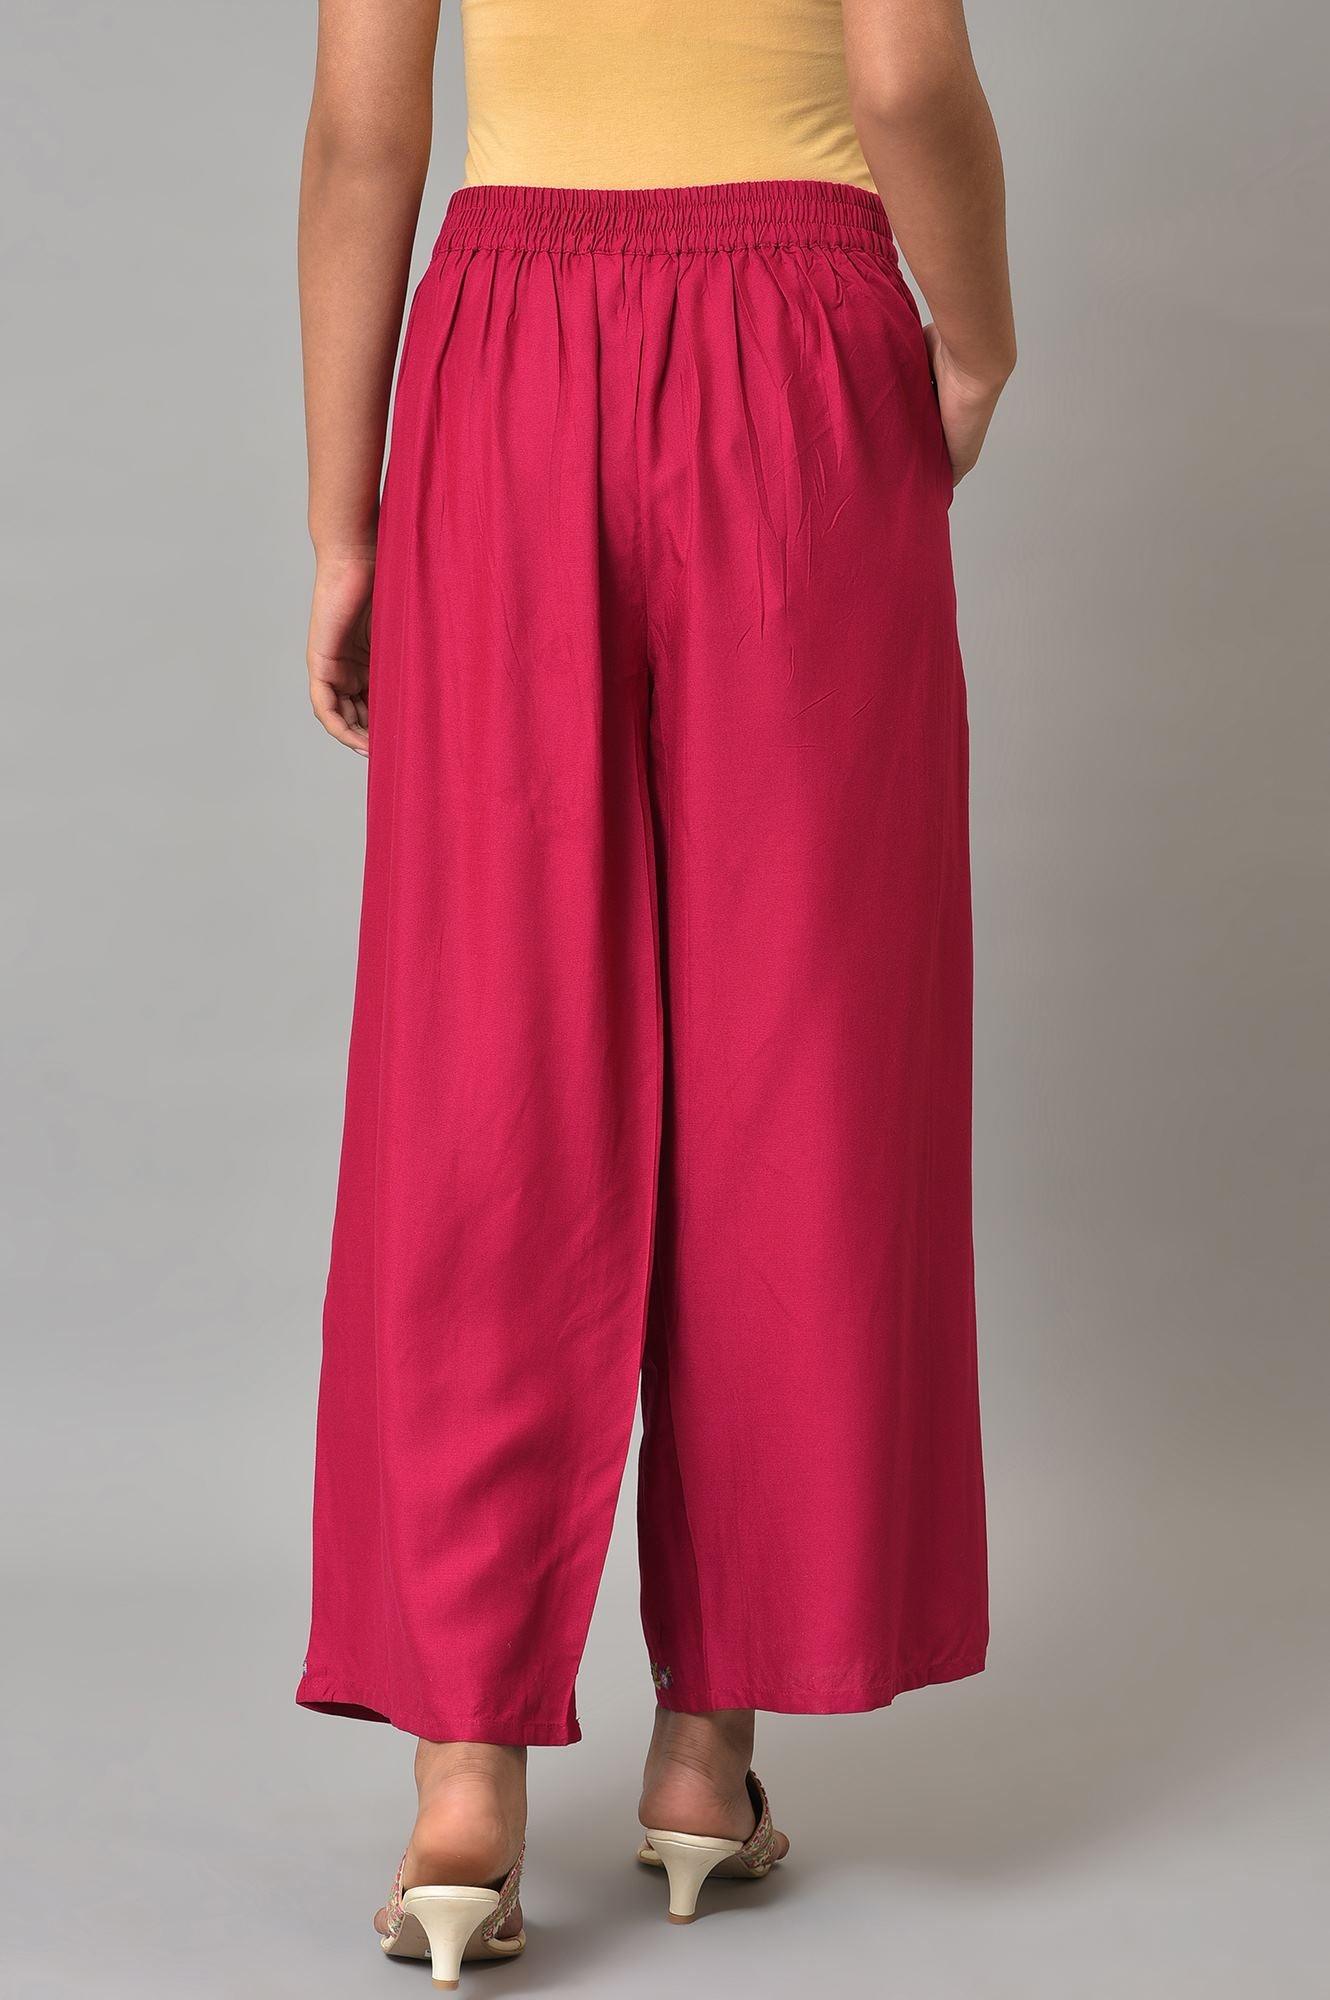 Pink Embroidered Plus Size Parallel Pants - wforwoman